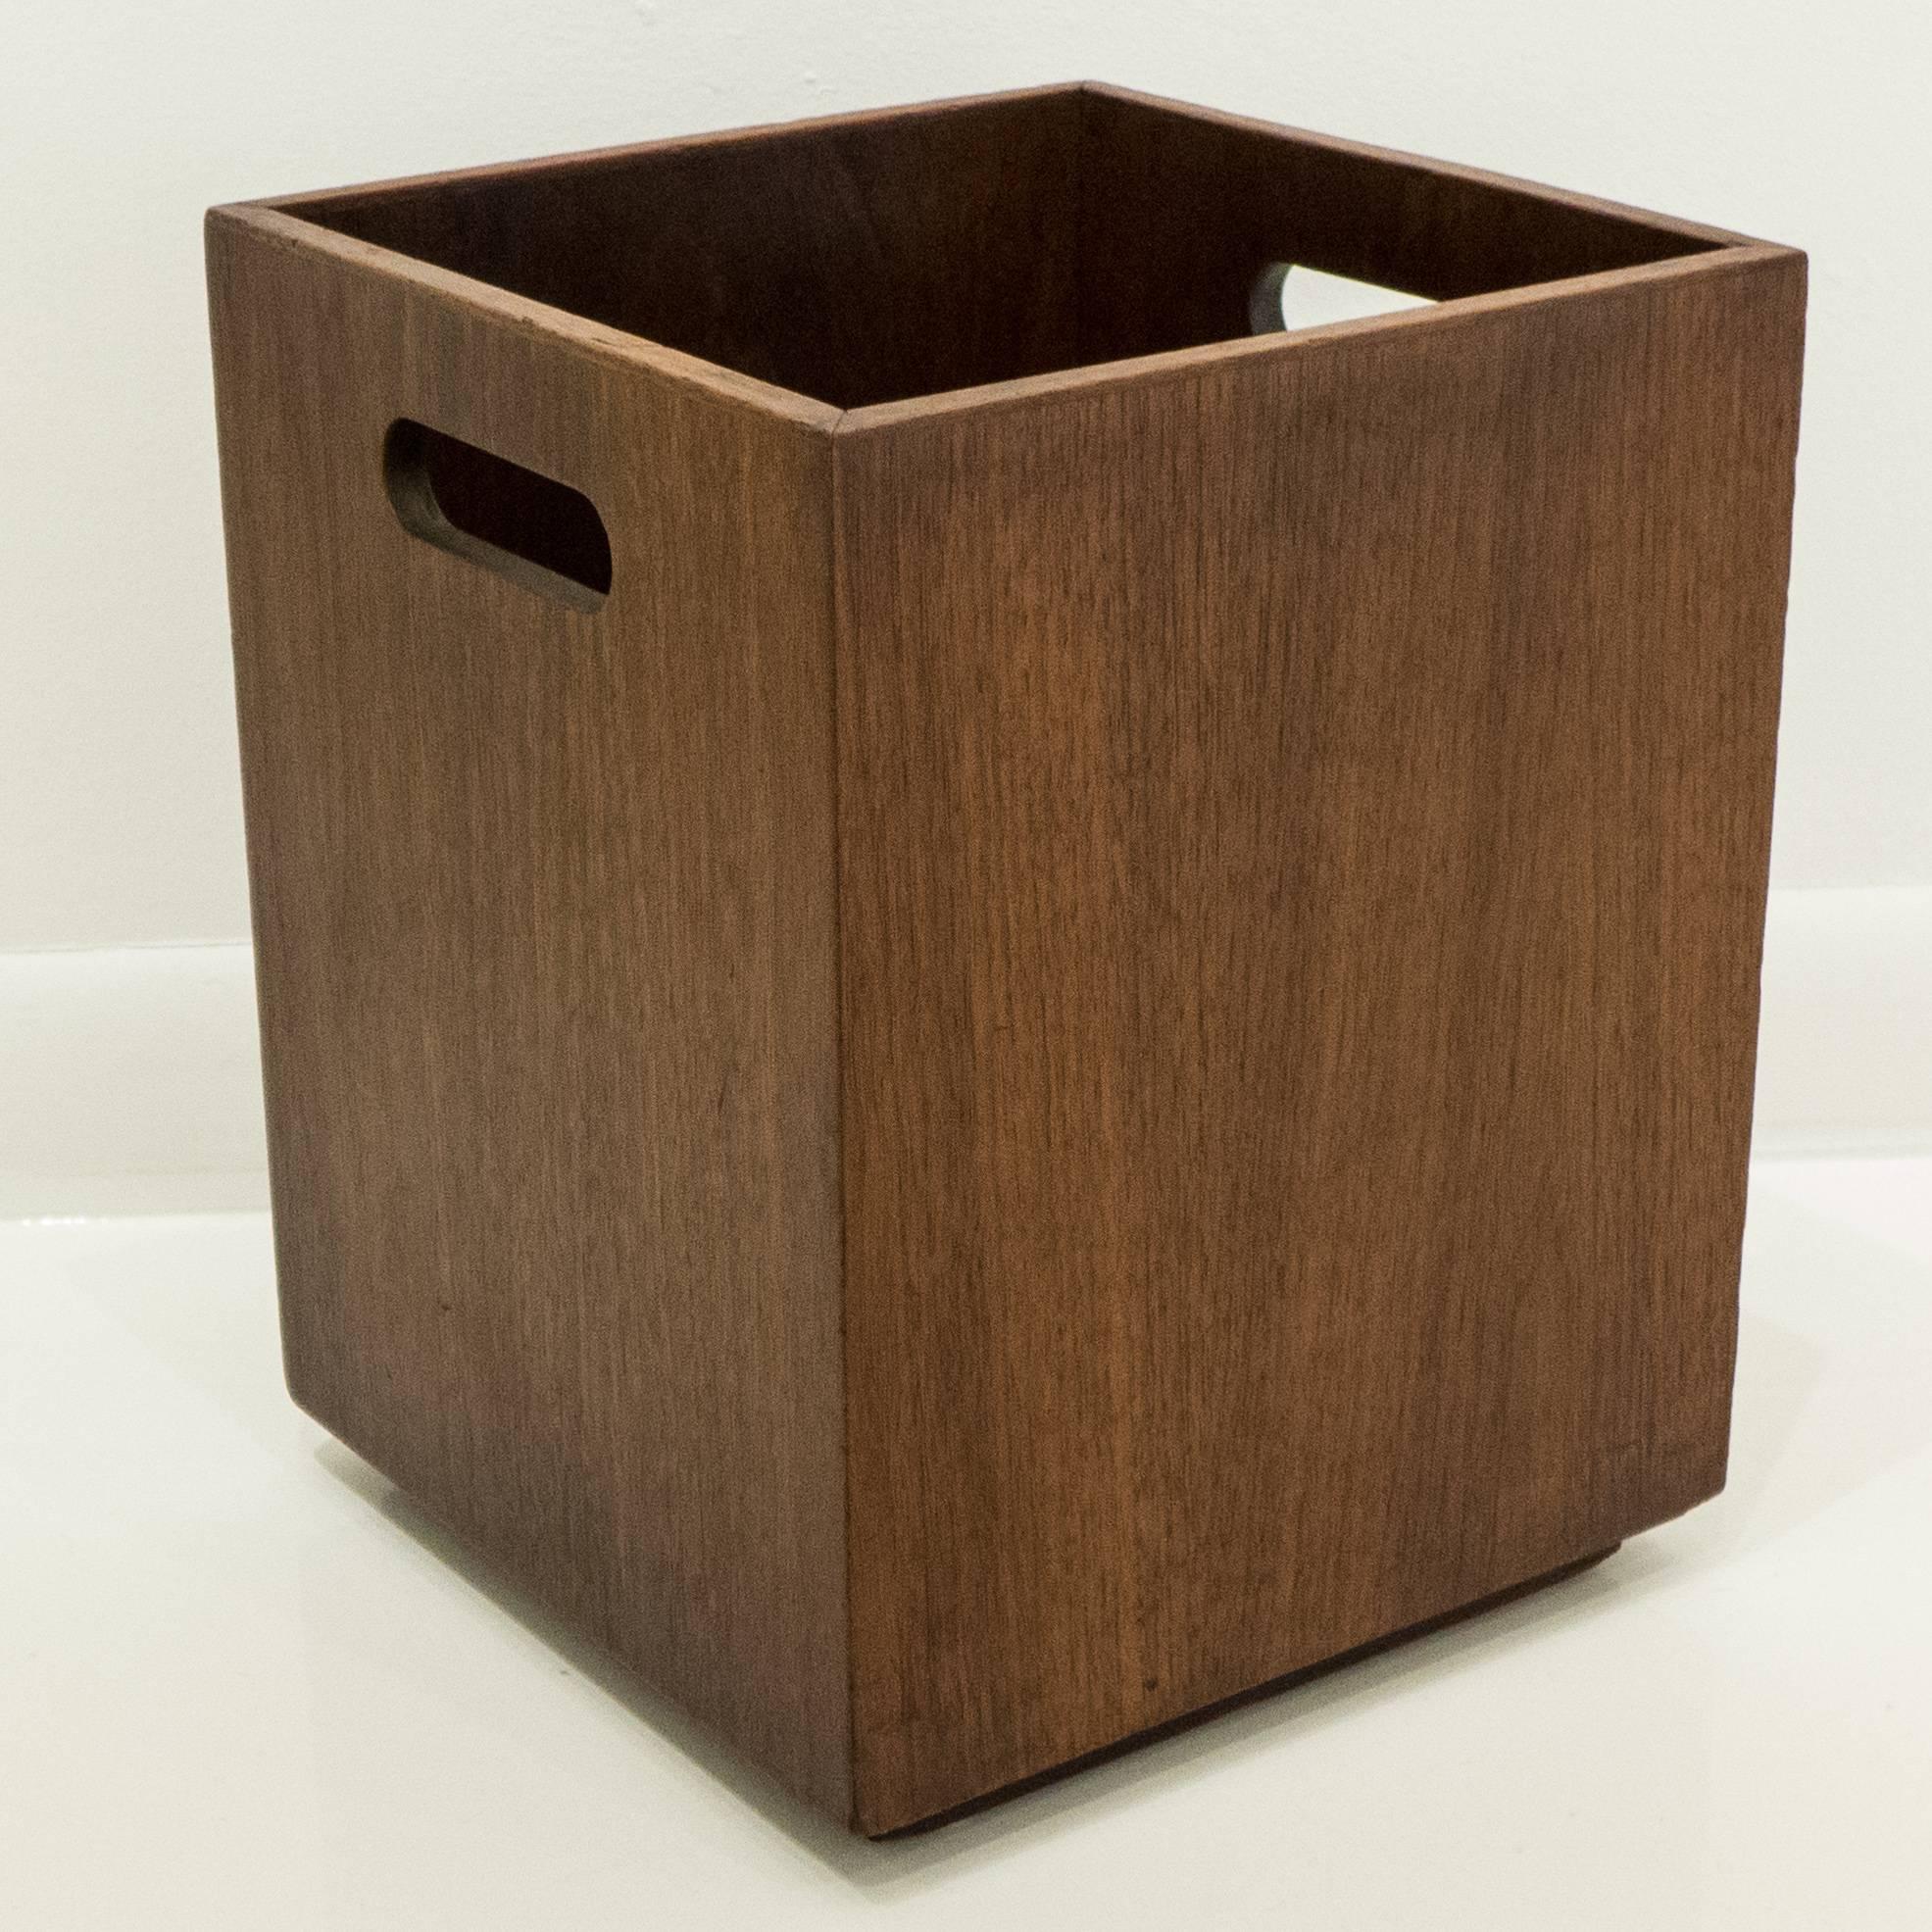 Square wastebasket with plinth base and oval cut-out handles, in walnut. Designed and made by Jens Risom, circa 1960s.